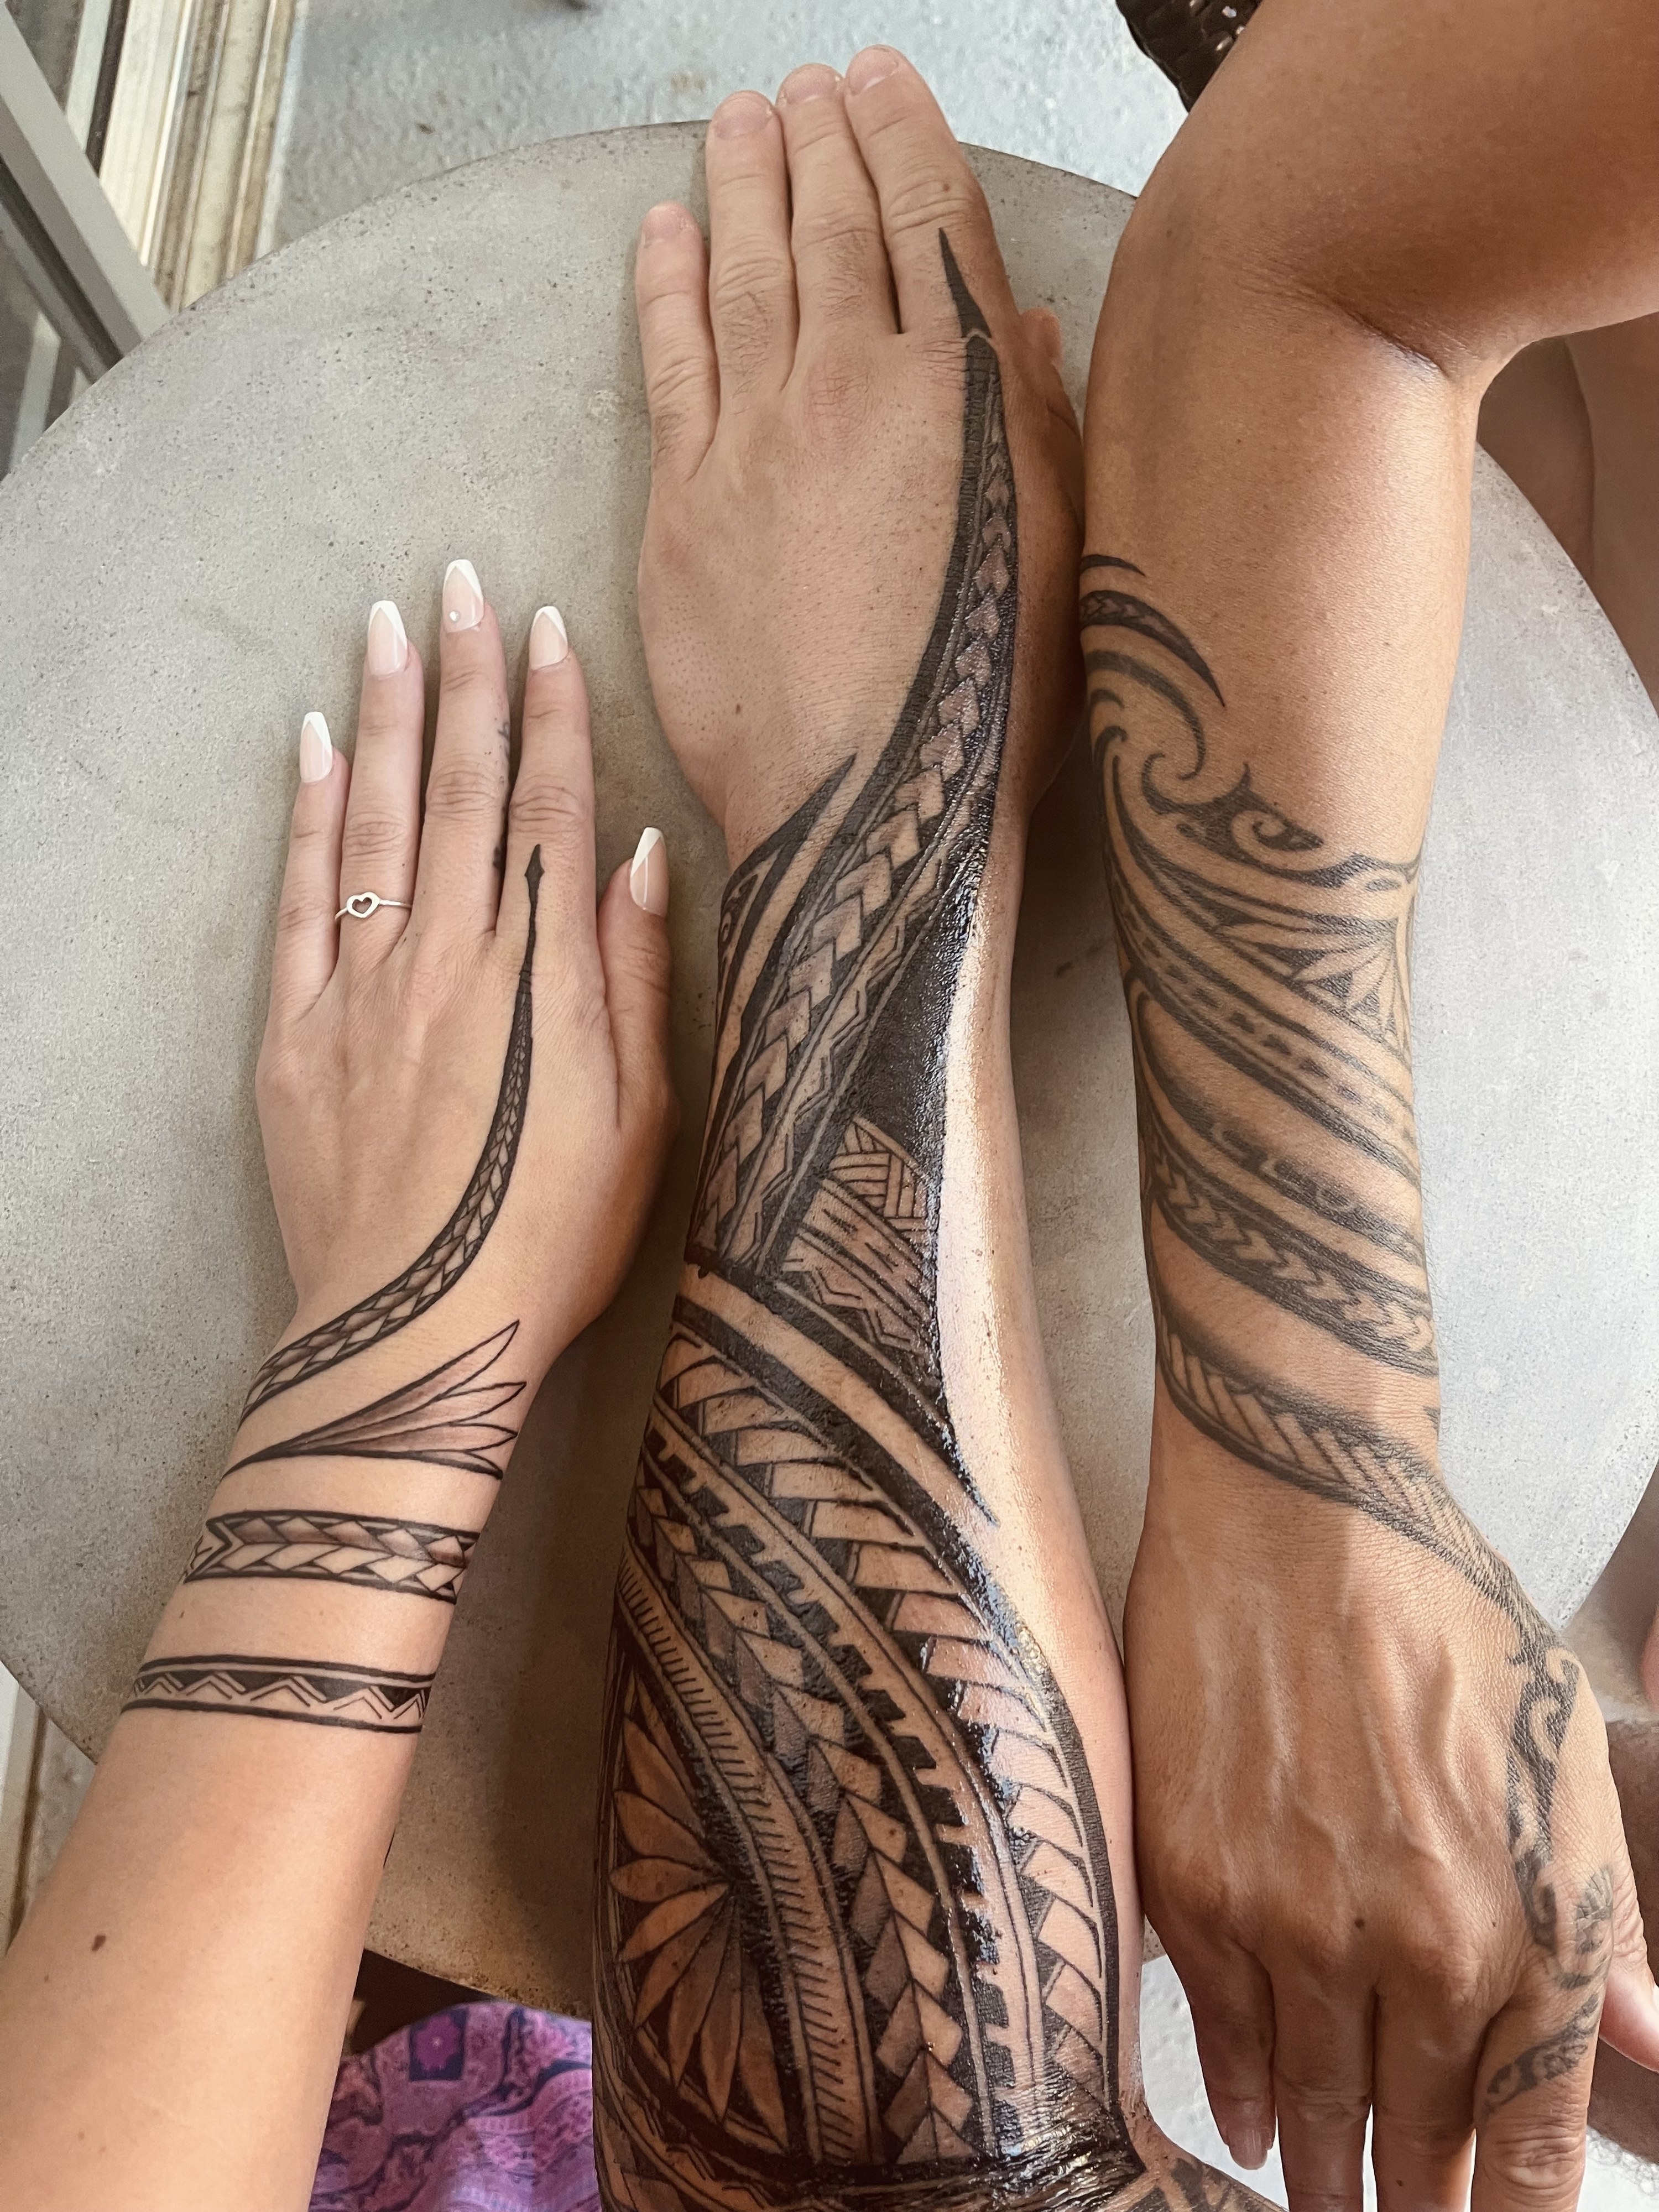 Tattoos on hands and arms